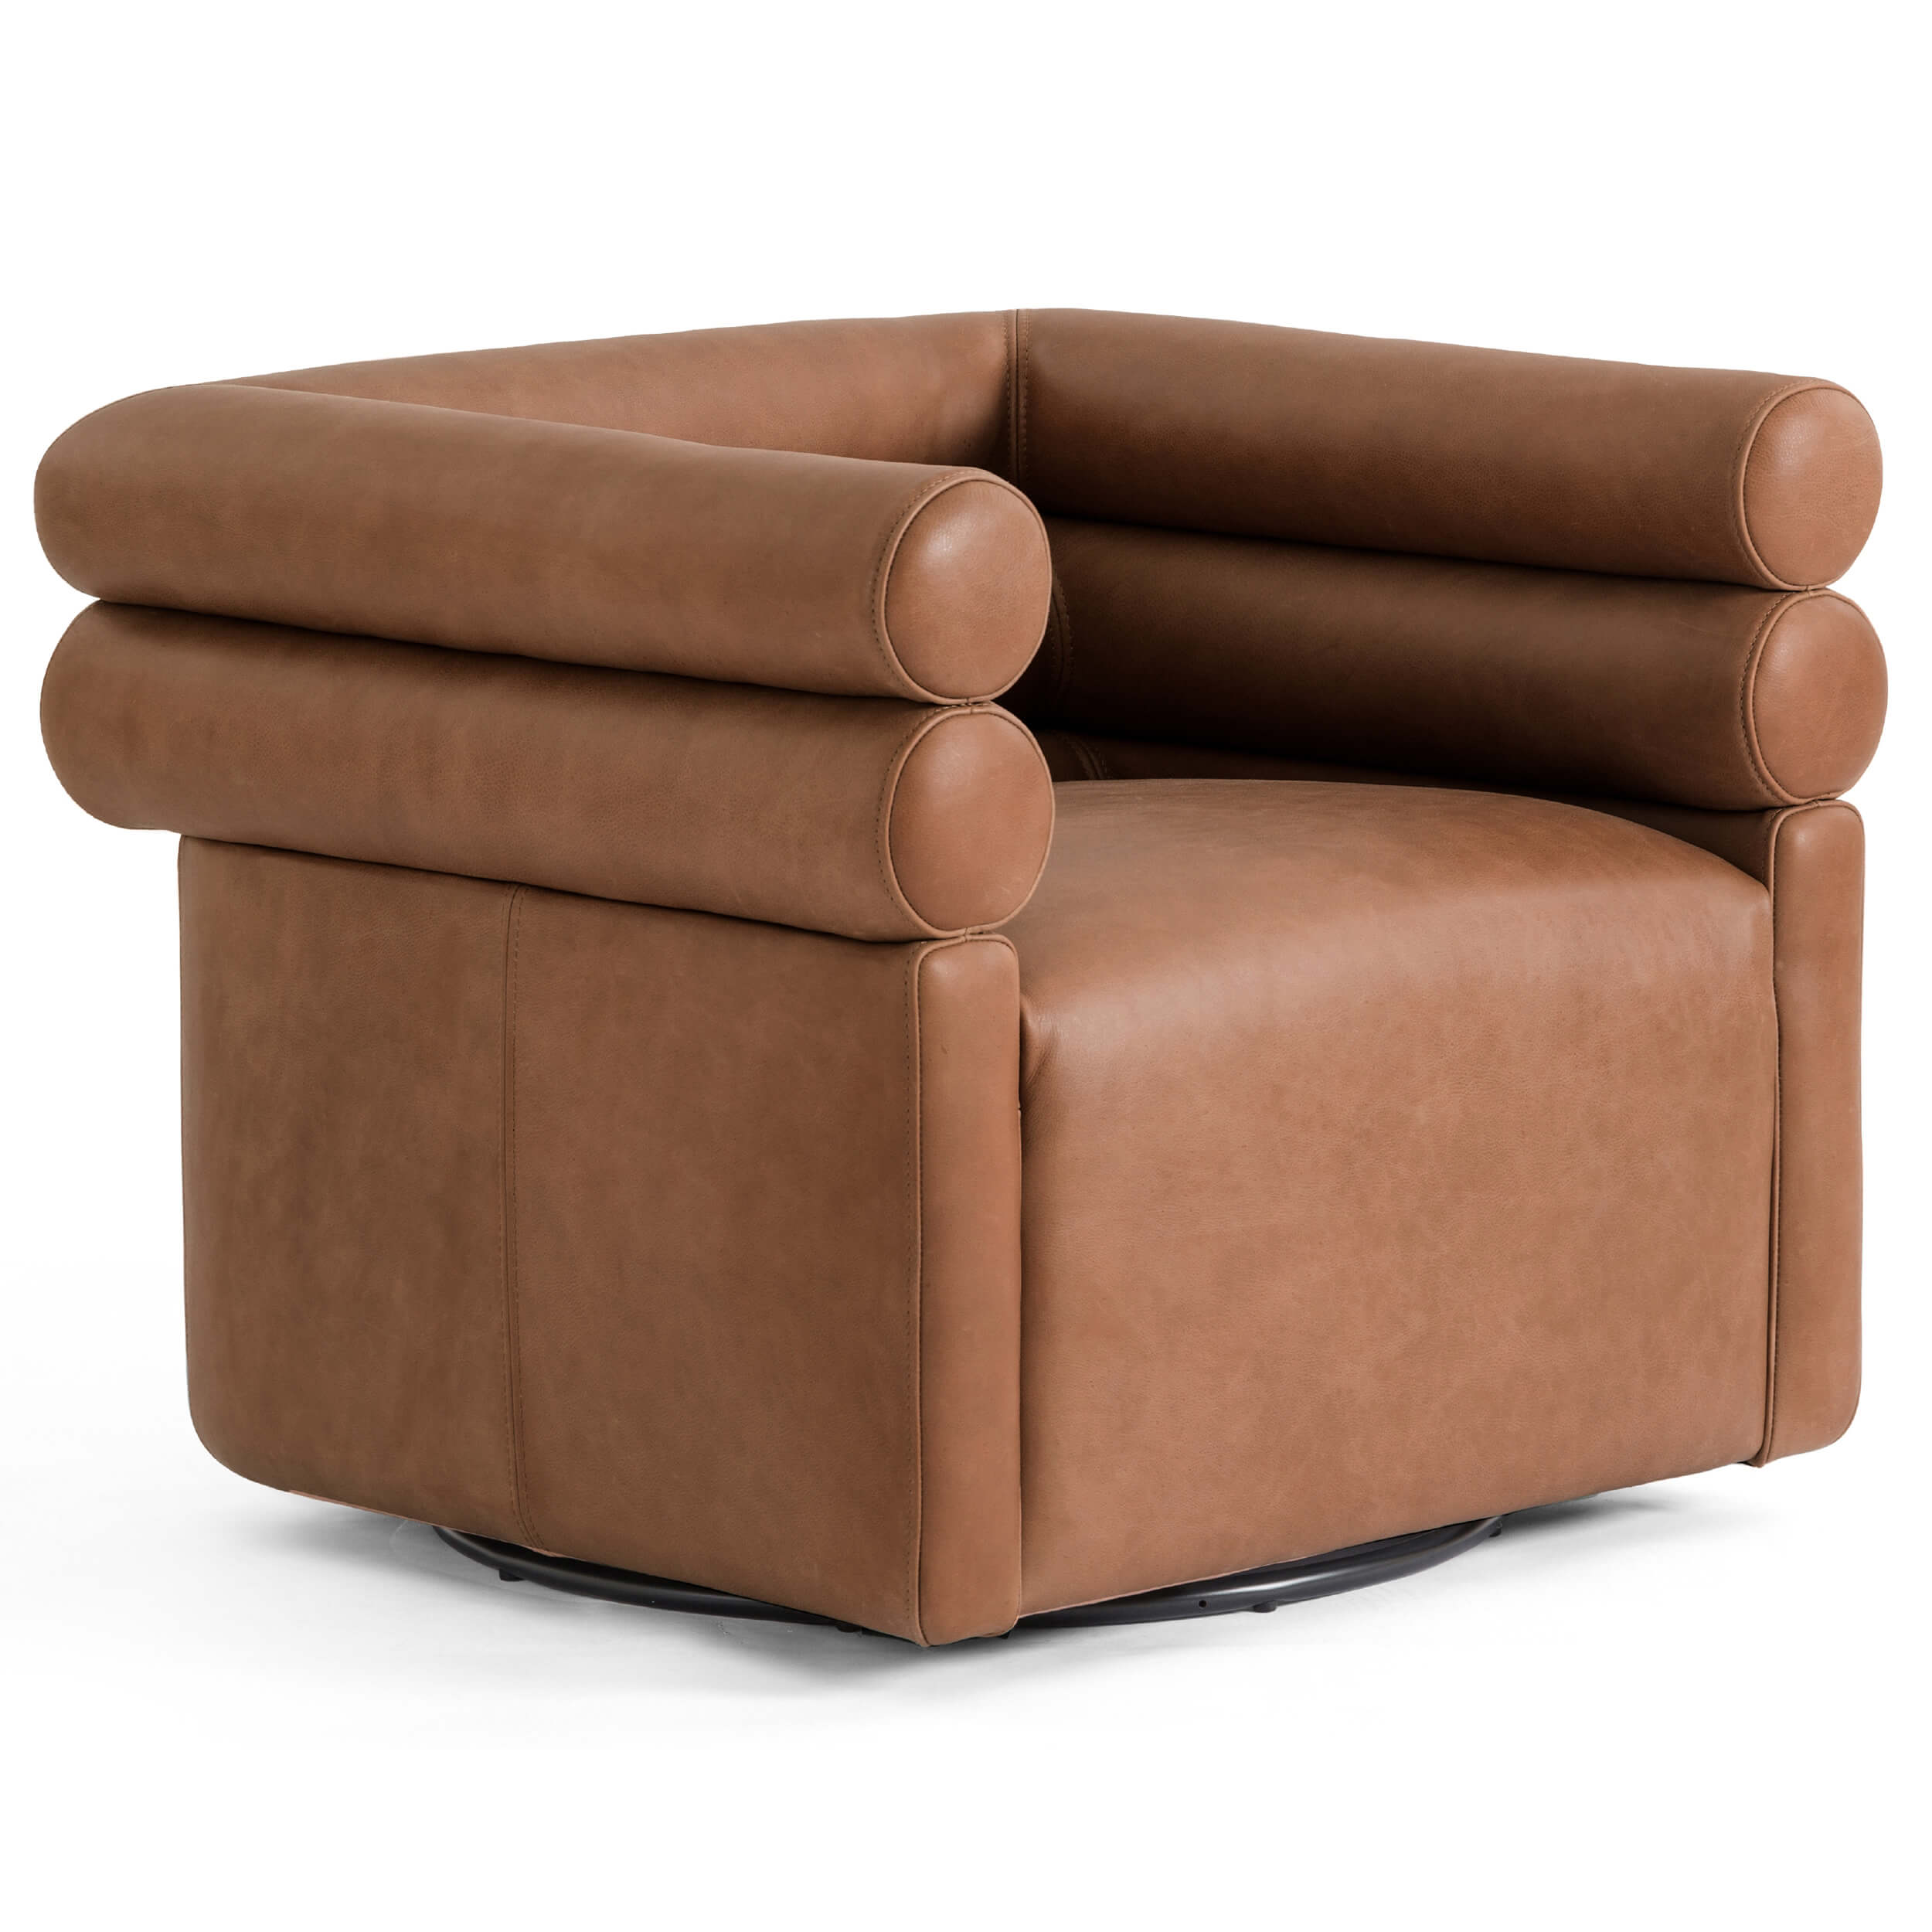 Image of Evie Leather Swivel Chair, Palermo Cognac